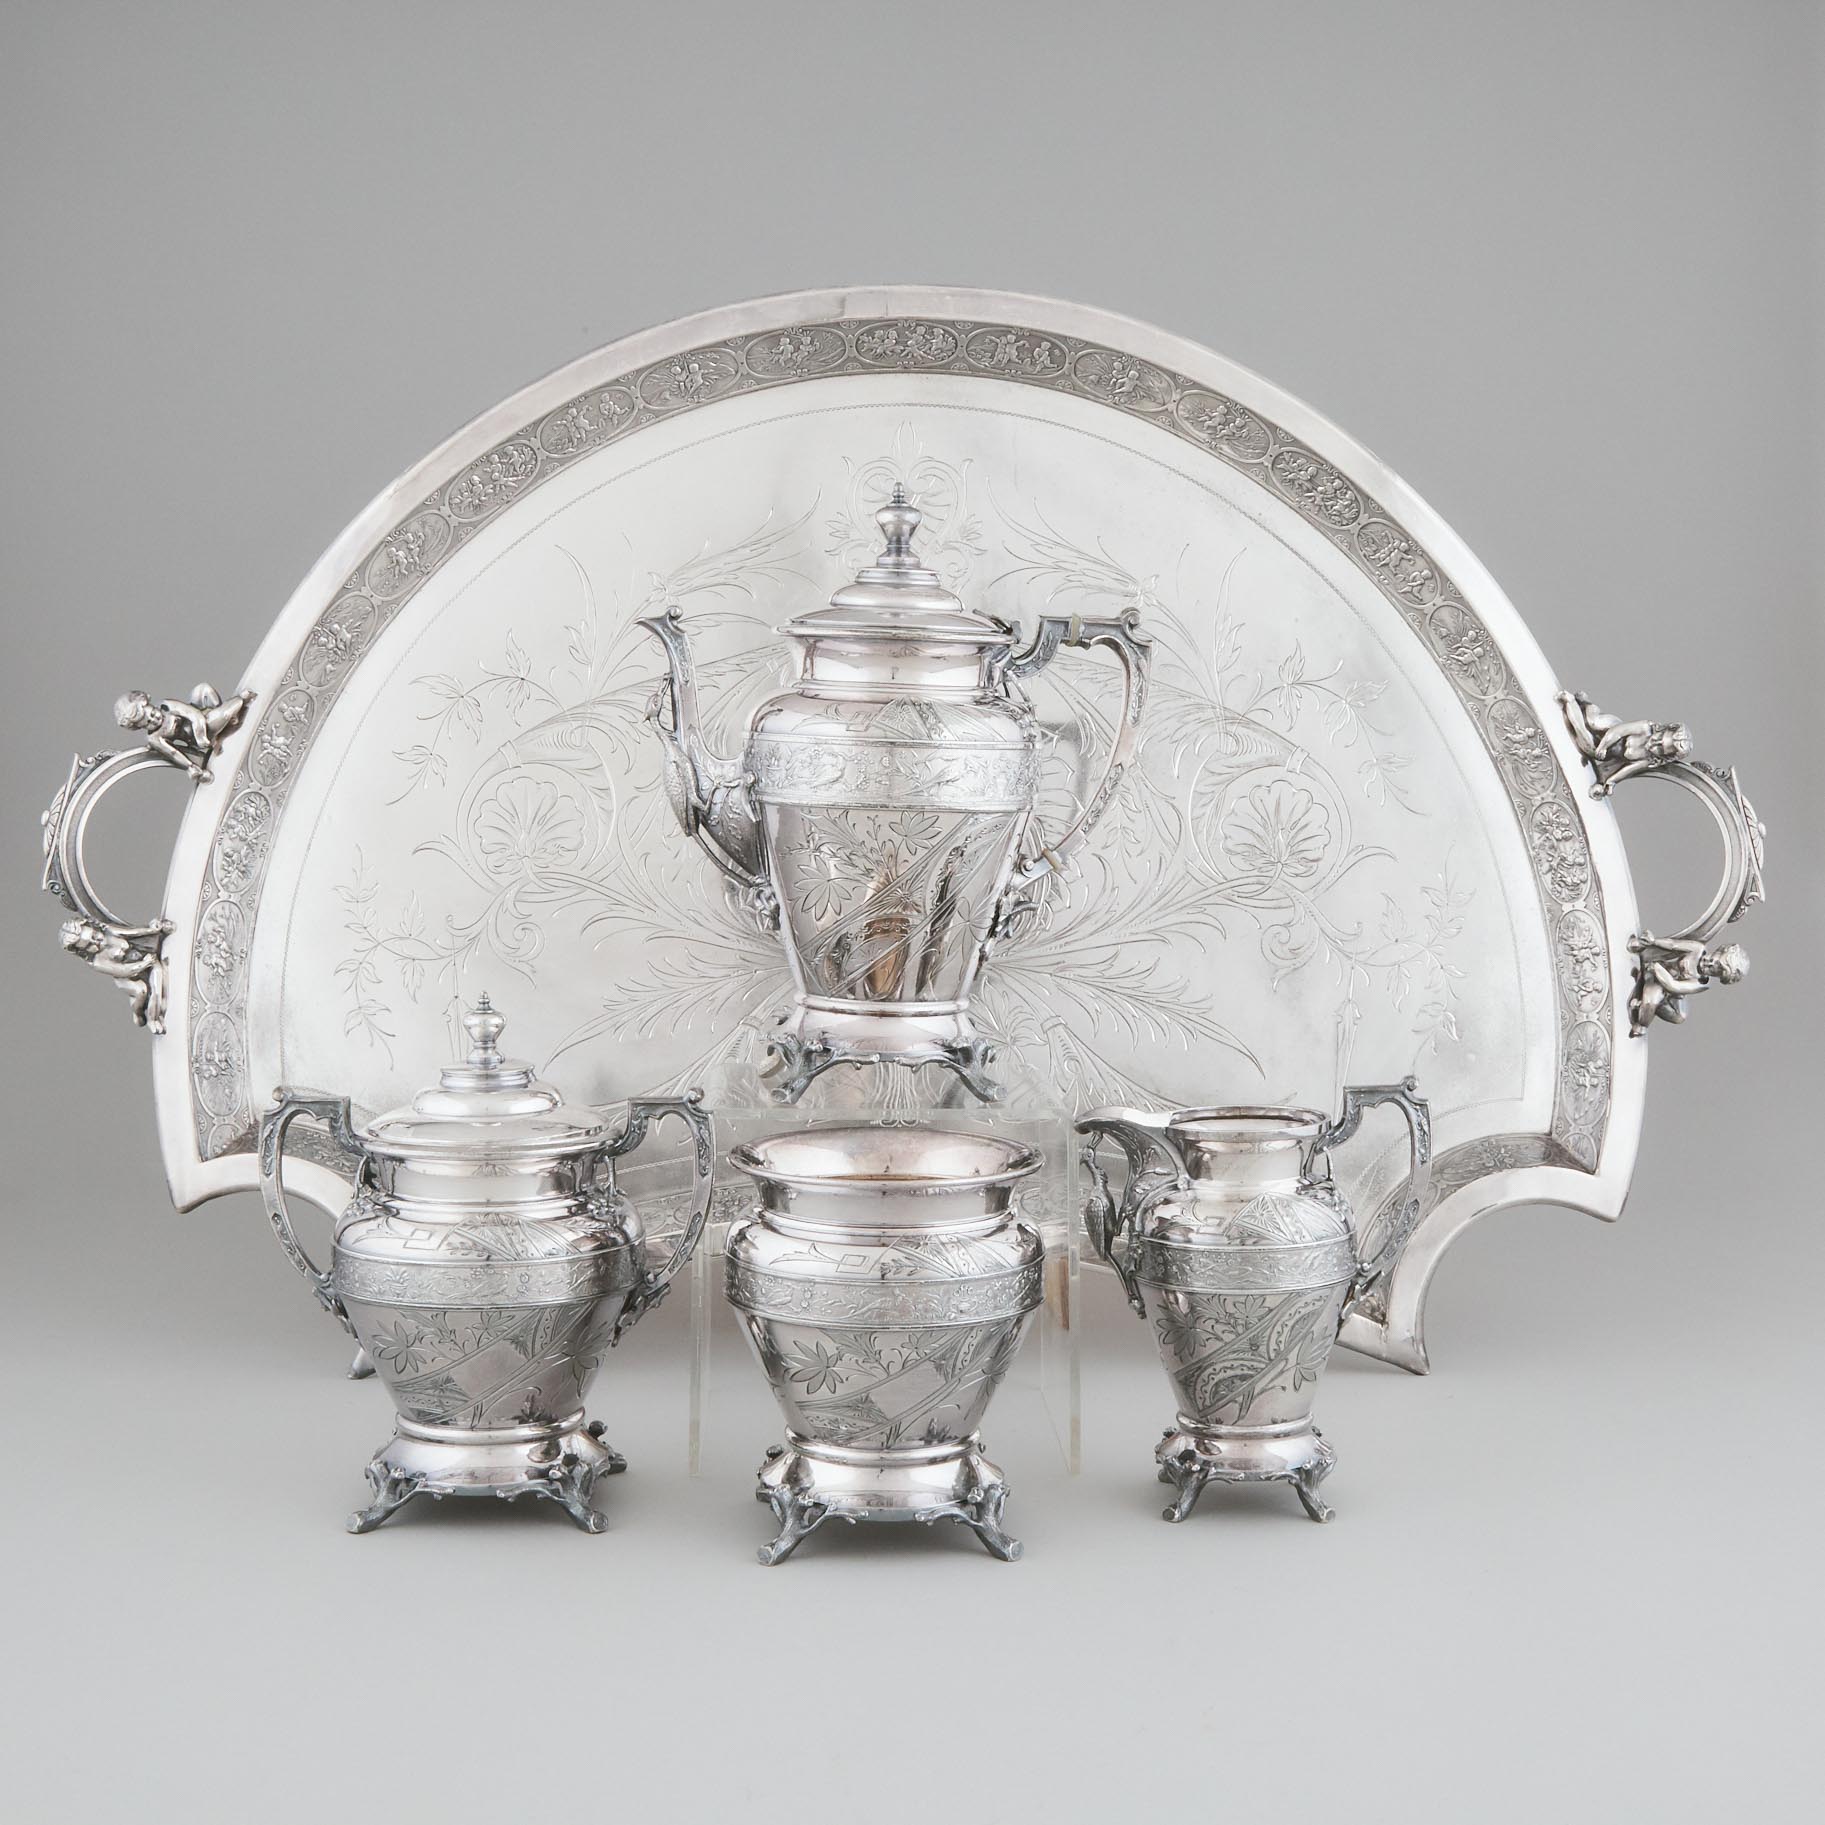 Canadian Silver Plated Tea Service, Robert Wilkes & Co., c.1876-80